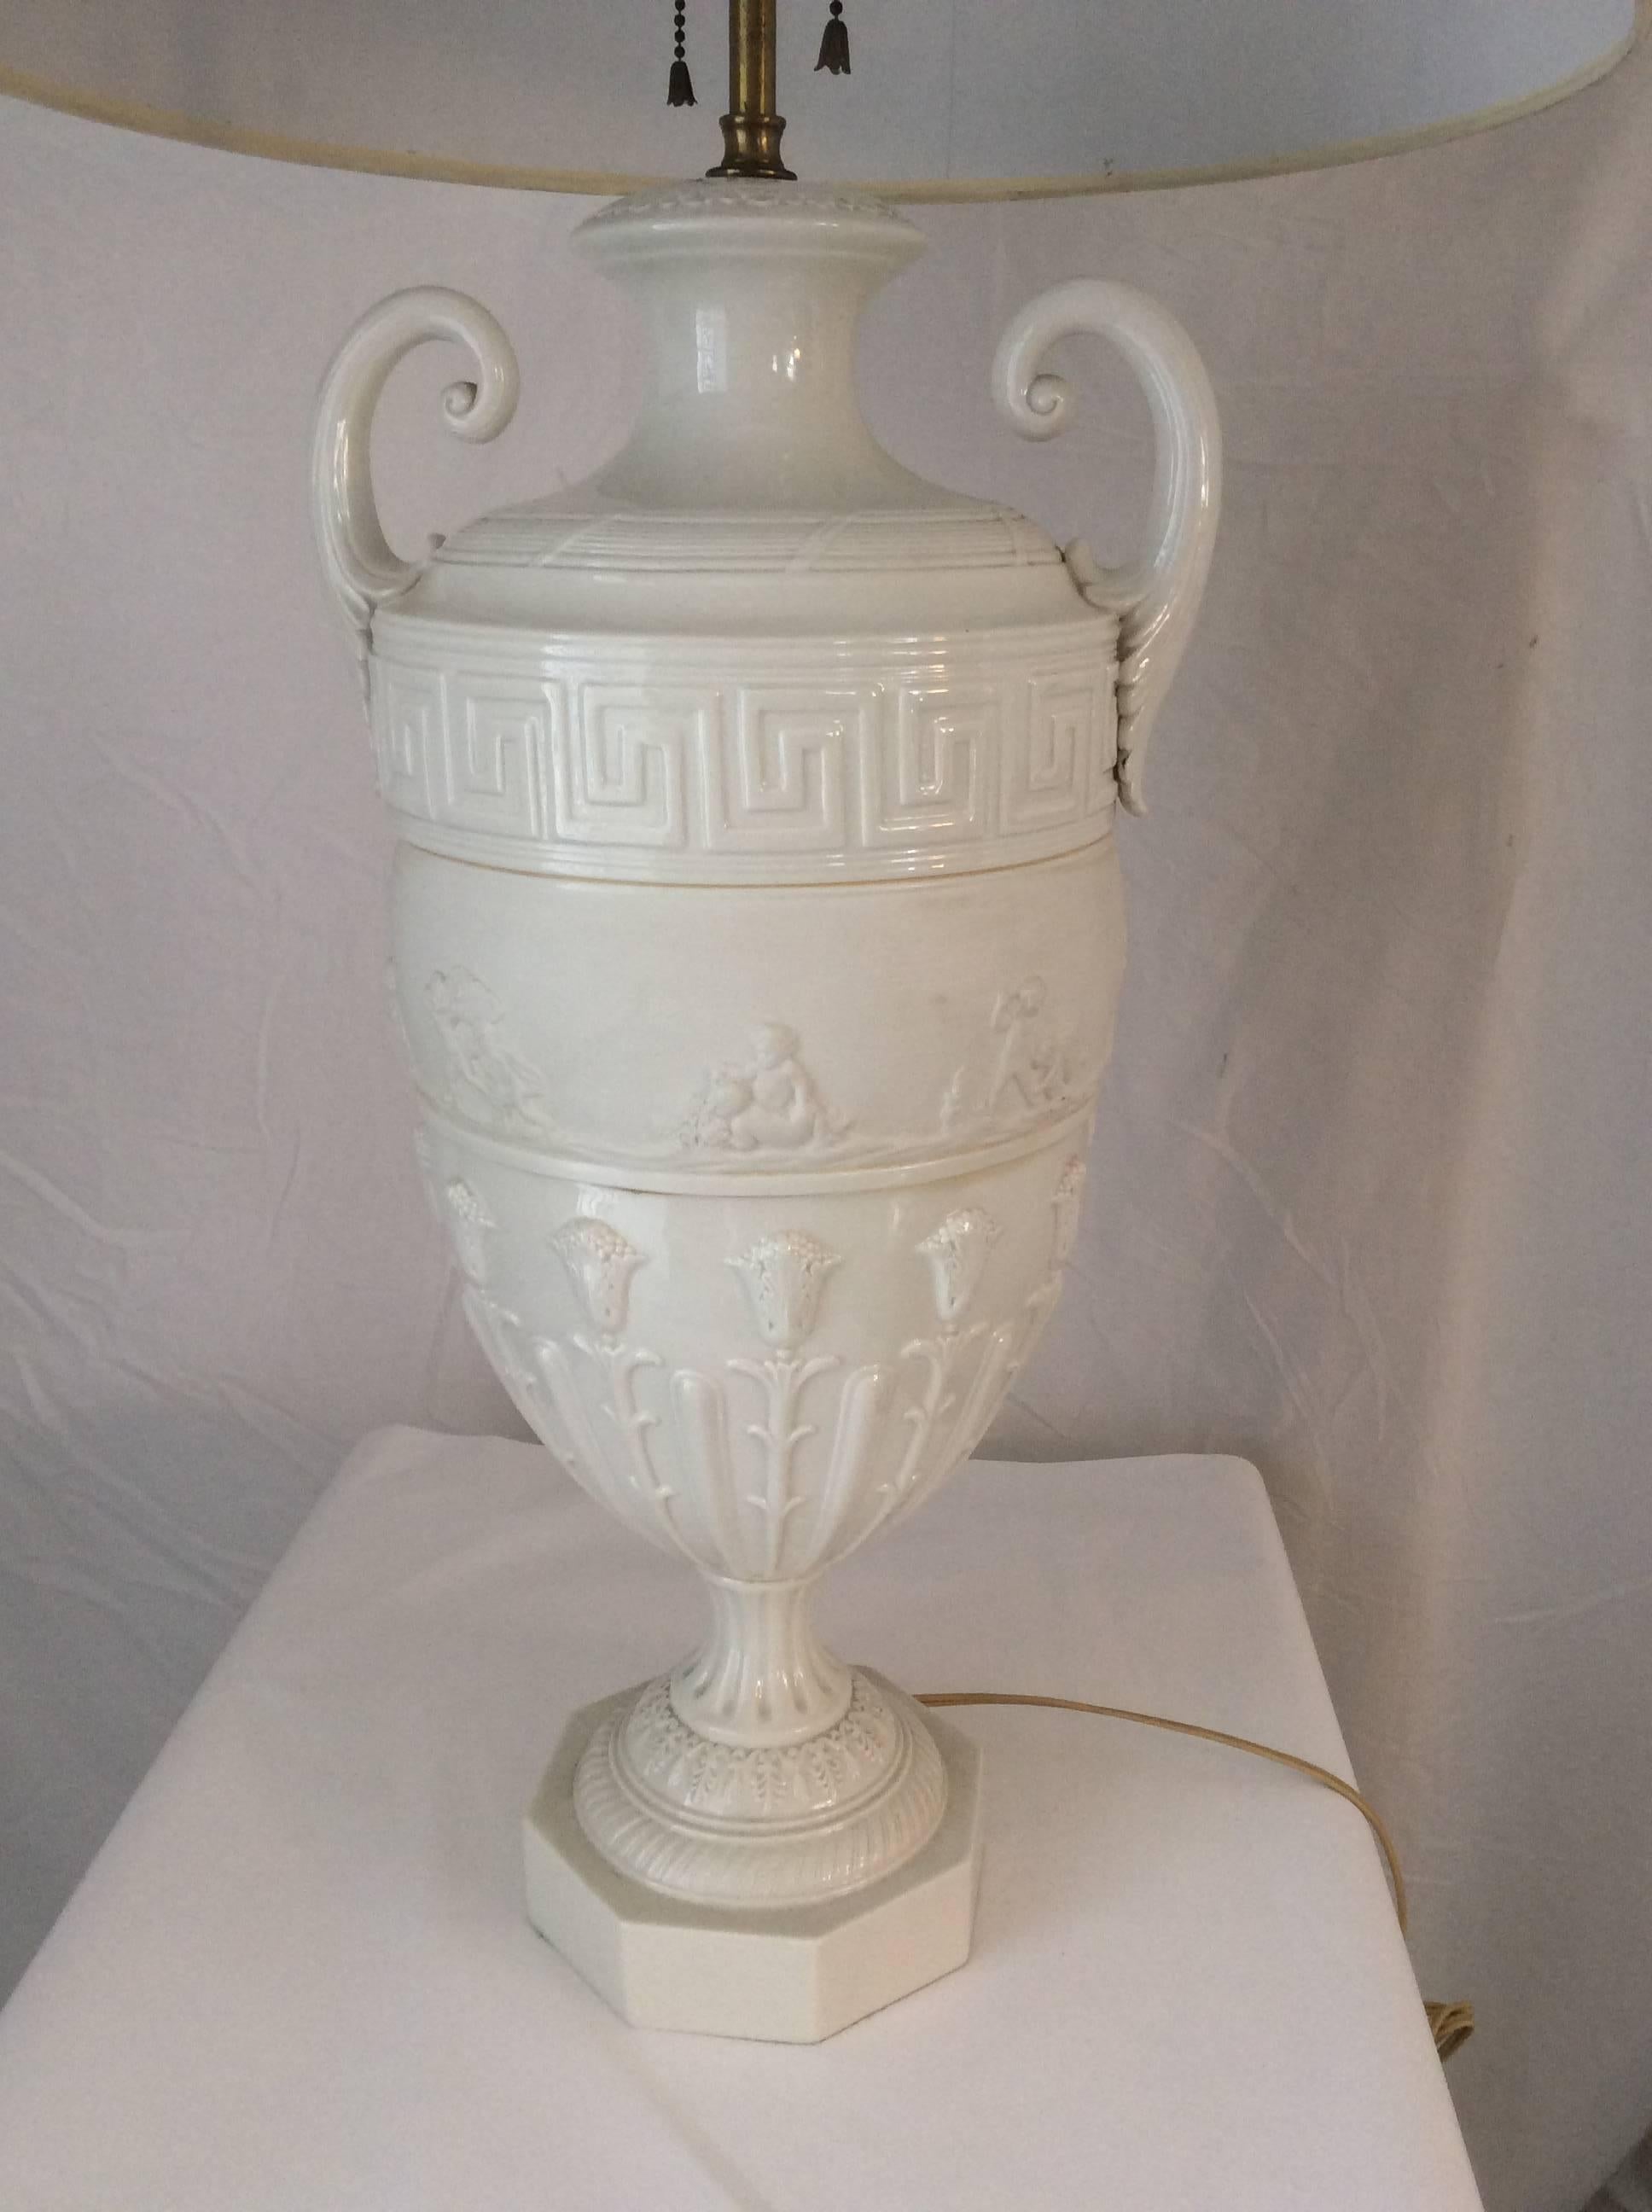 You are looking at a stunning Italian table lamp. Made in the classical style, this urn shape lamp with Greek key motif and raised foliage pattern is very elegant. It has a banding of small raised puttis frolicking in a matte white bisque finish to